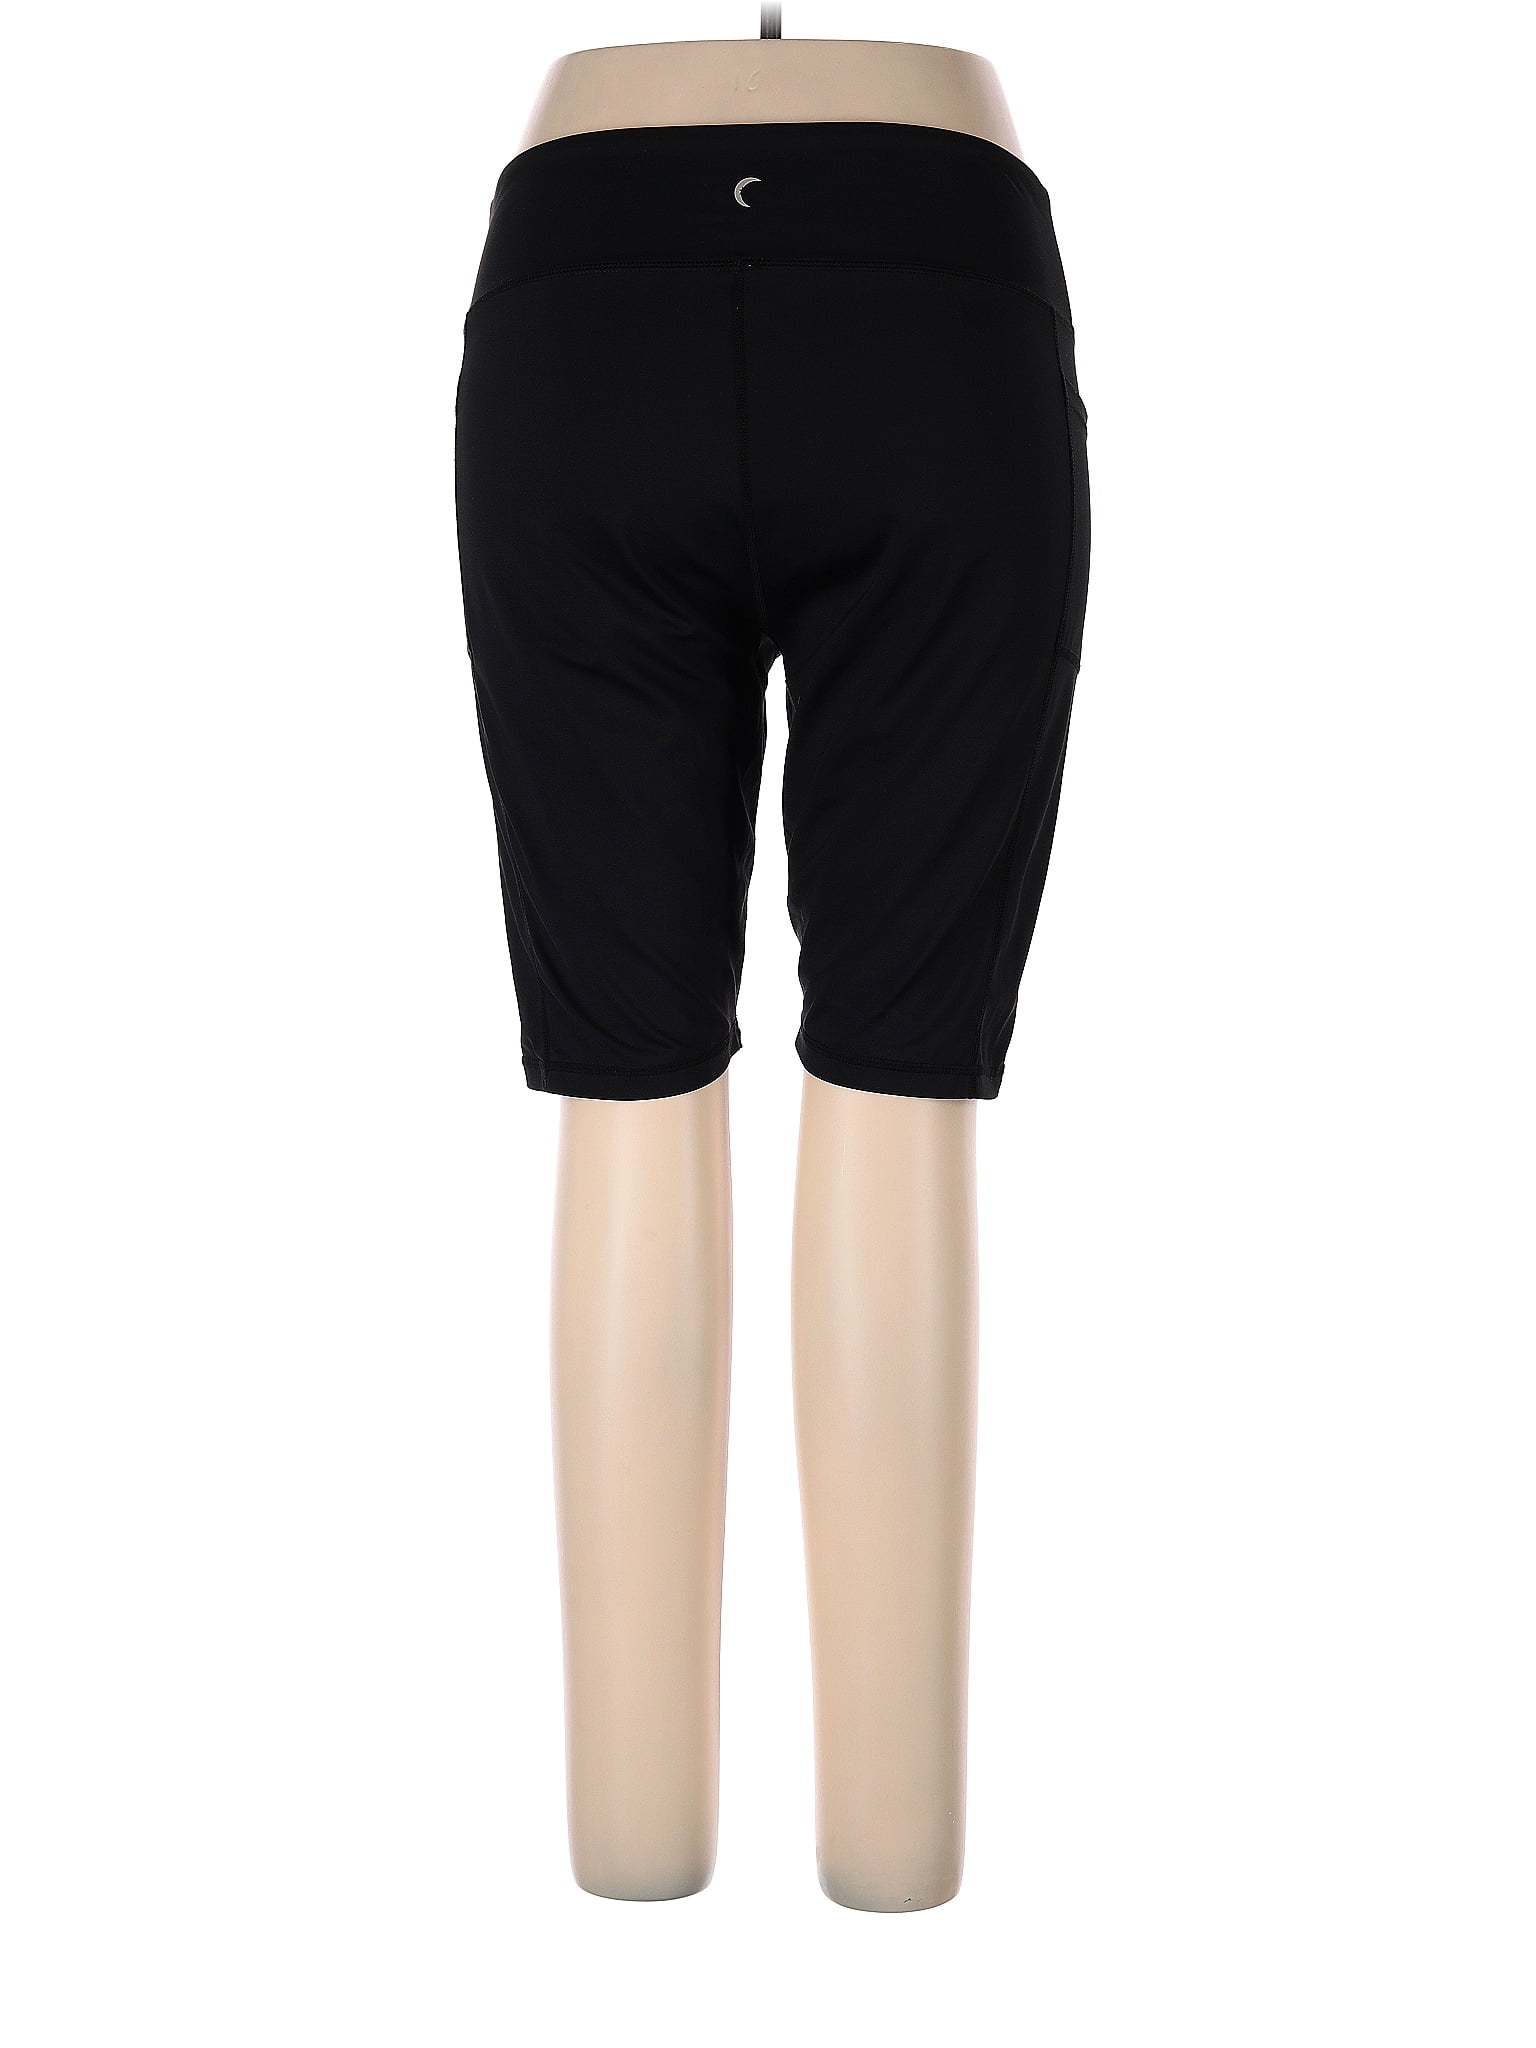 Zyia Active Solid Black Leggings Size 6 - 8 - 44% off